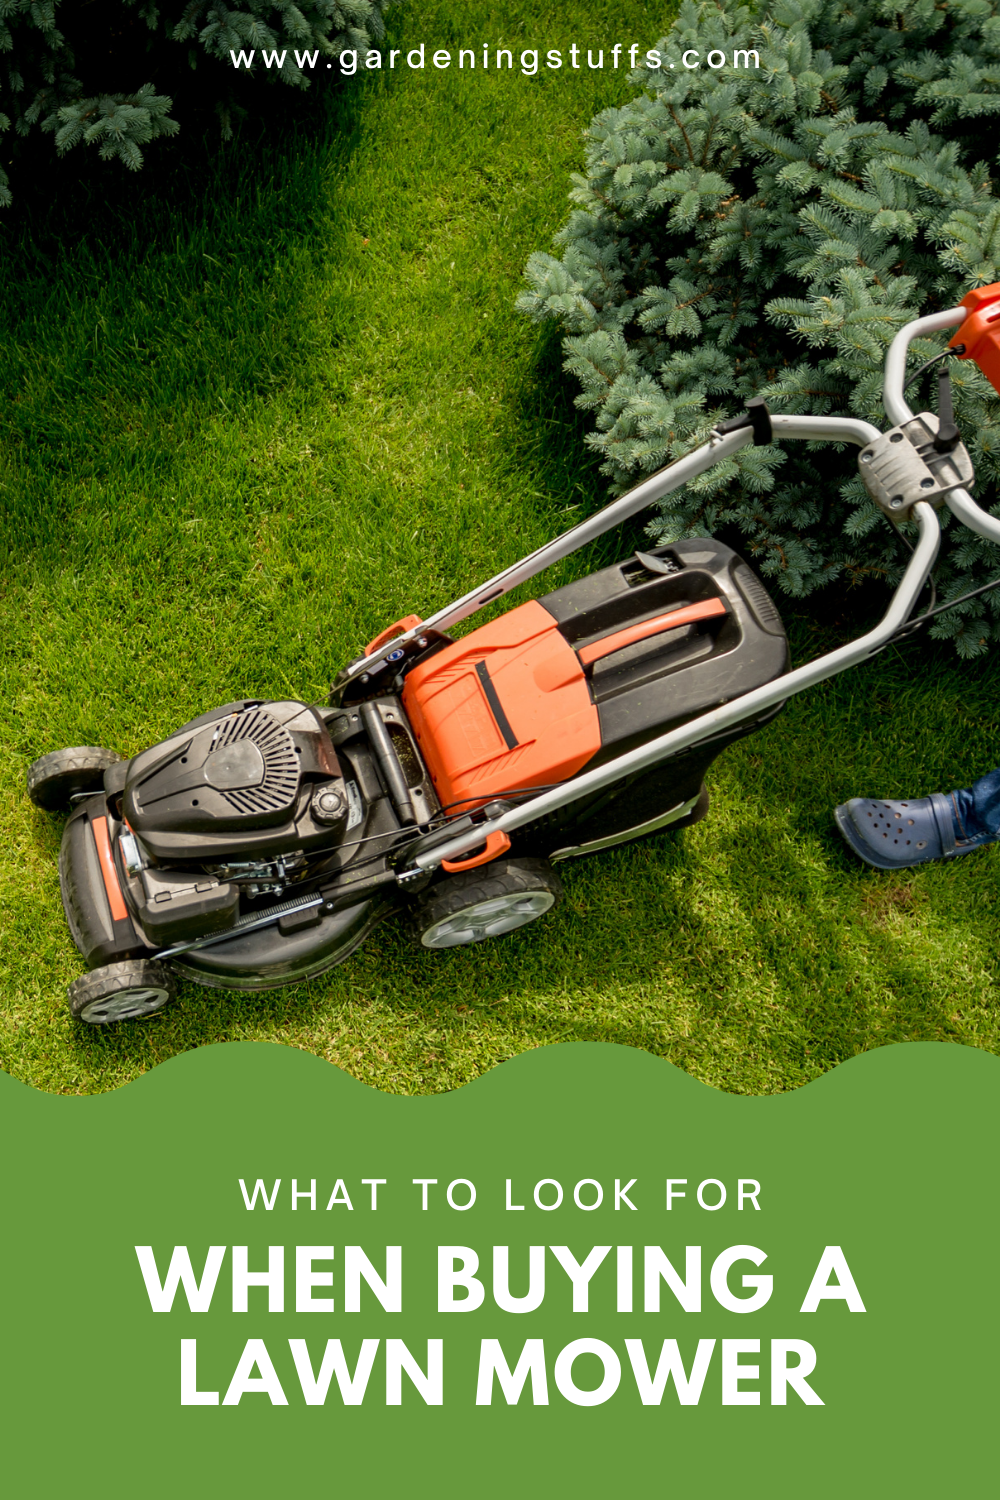 With all the different kinds of mowers available today, choosing one can be challenging. Read on to know things to consider to help you select the best lawn mower.